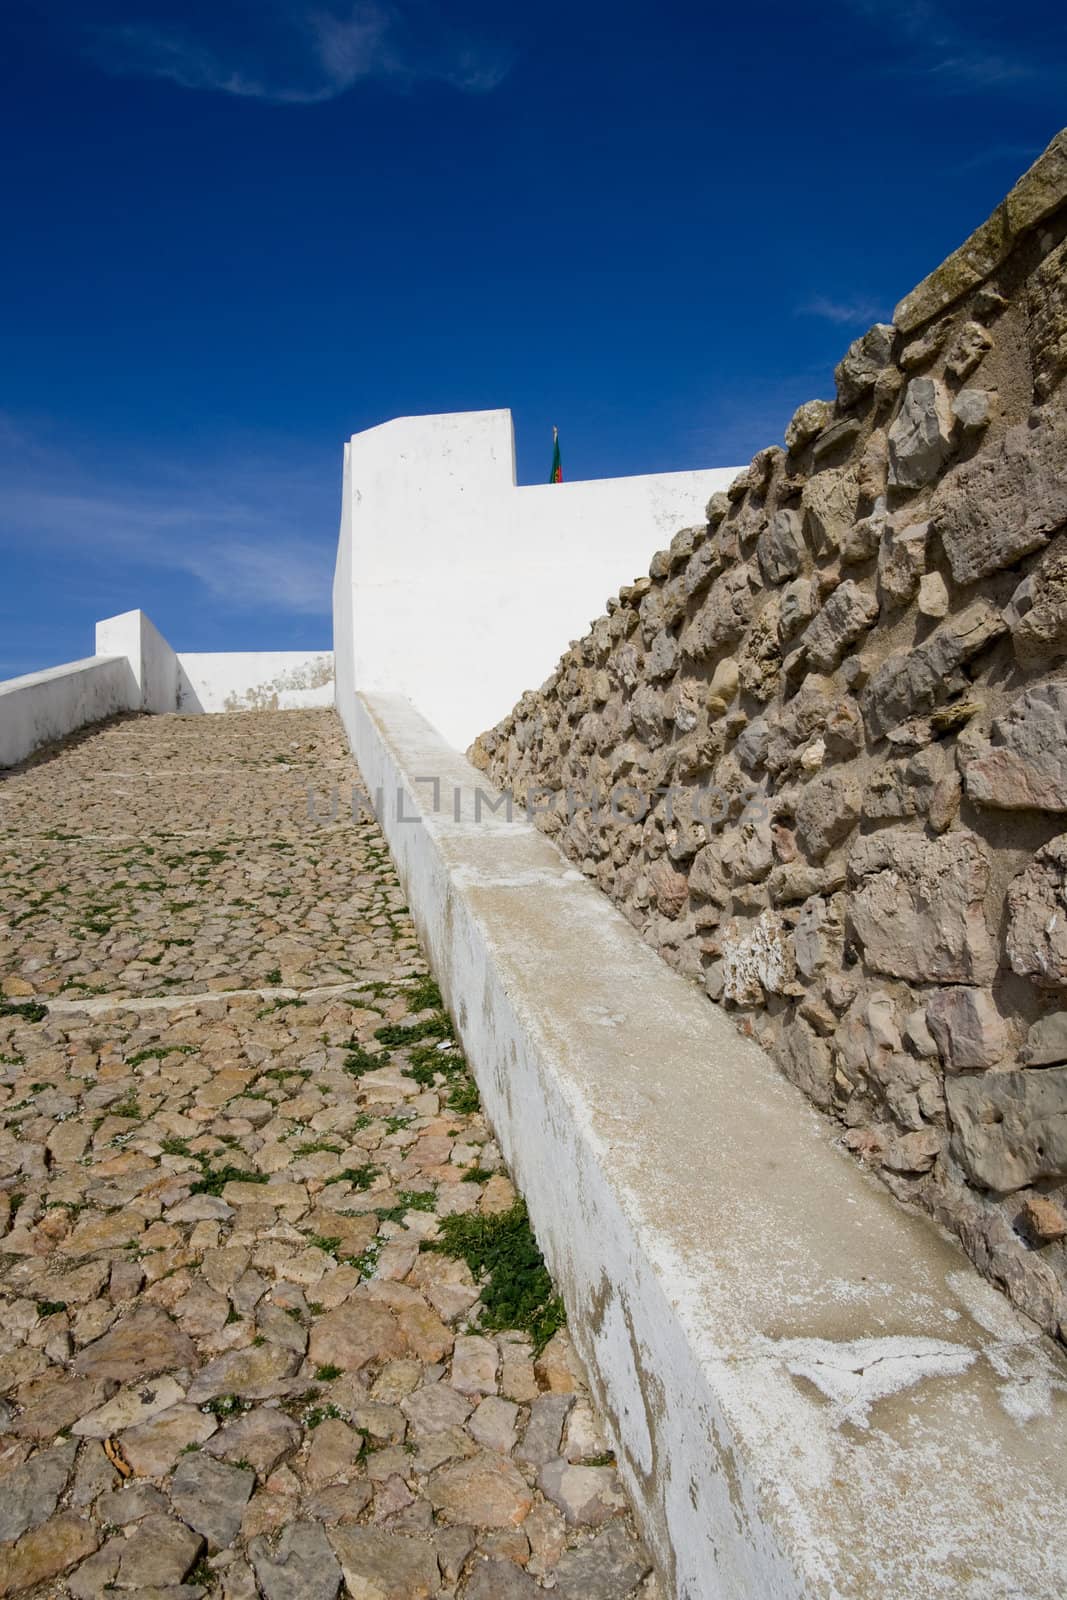 Climbing up the side of the Fortress, just outside of Sagres, Portugal, in the Algarve.